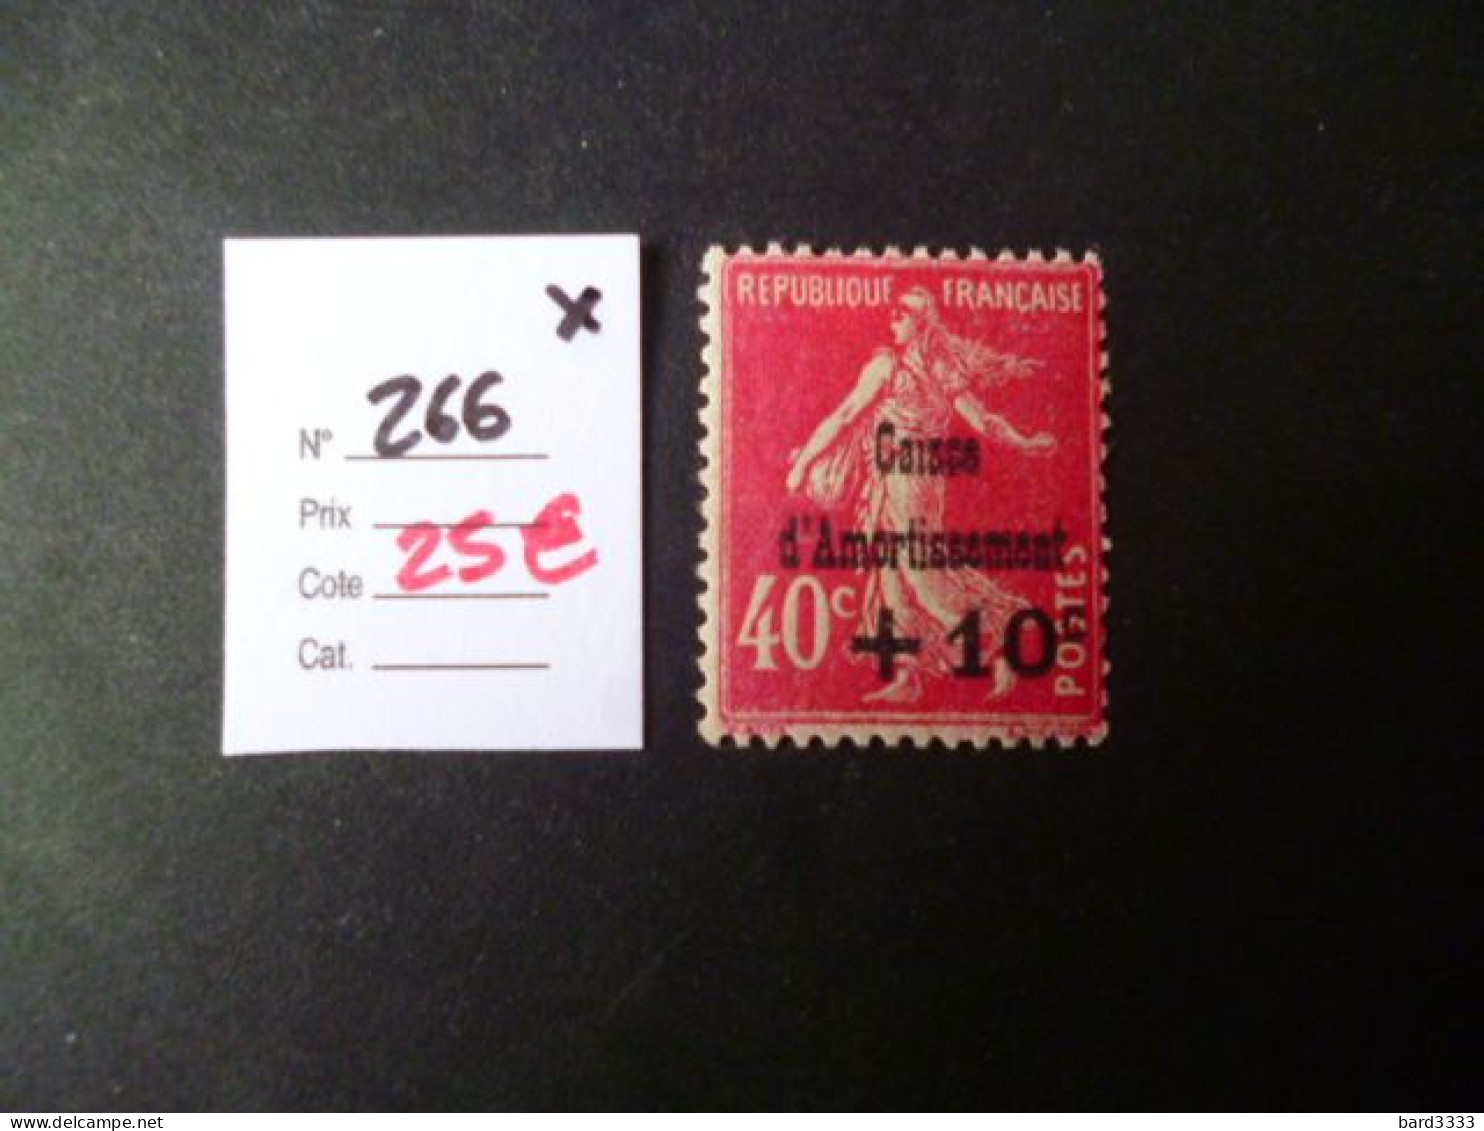 Timbre France Neuf * Caisse Amortissement N° 266 Cote 25  € - Unused Stamps